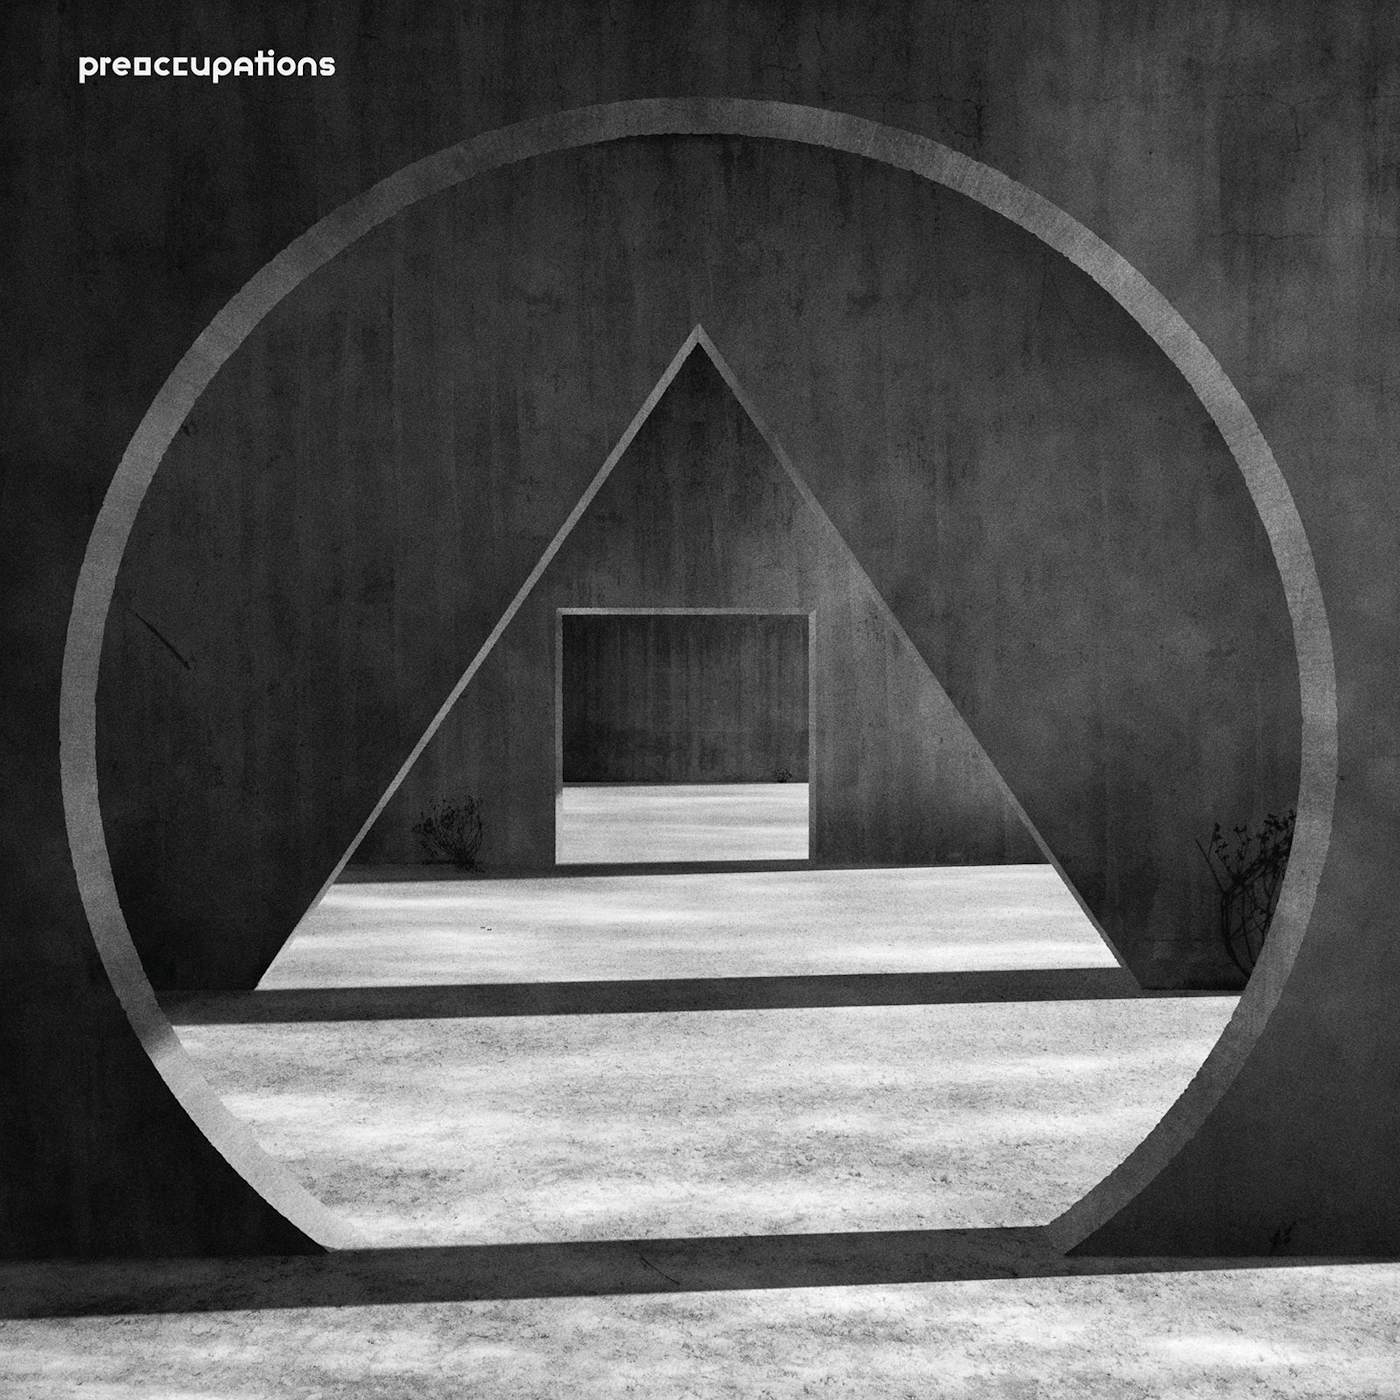 Preoccupations New Material Vinyl Record